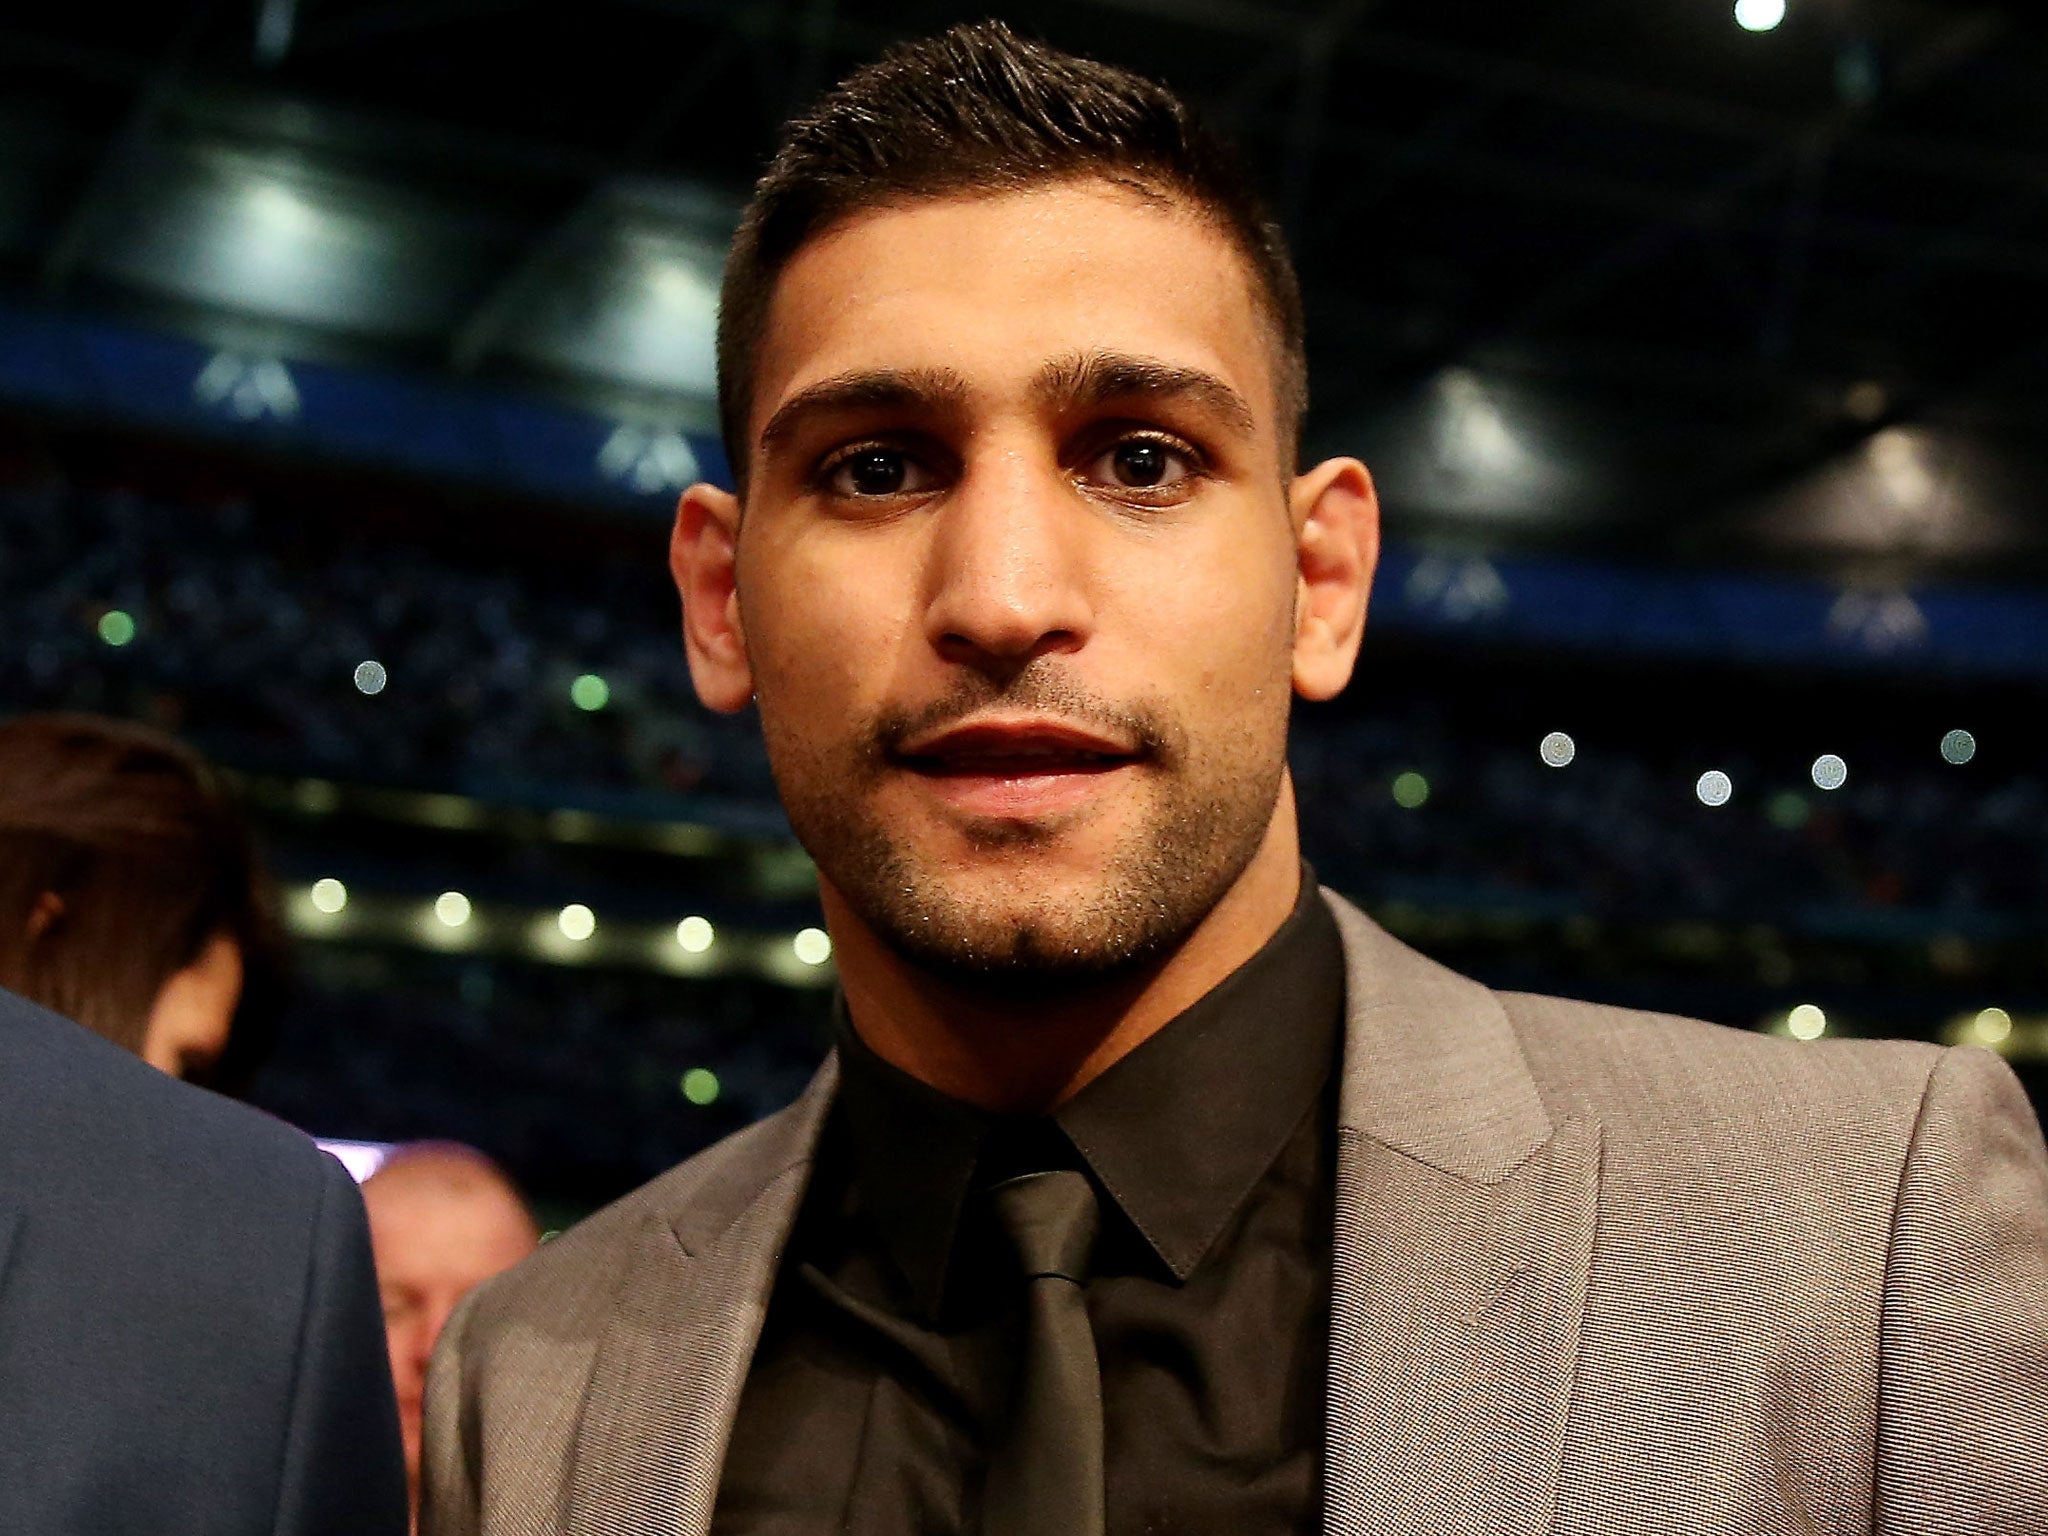 Amir Khan looks on during the IBF and WBA World Super Middleweight Championship bout between Carl Froch and George Groves at Wembley Stadium on May 31, 2014 in London, England.